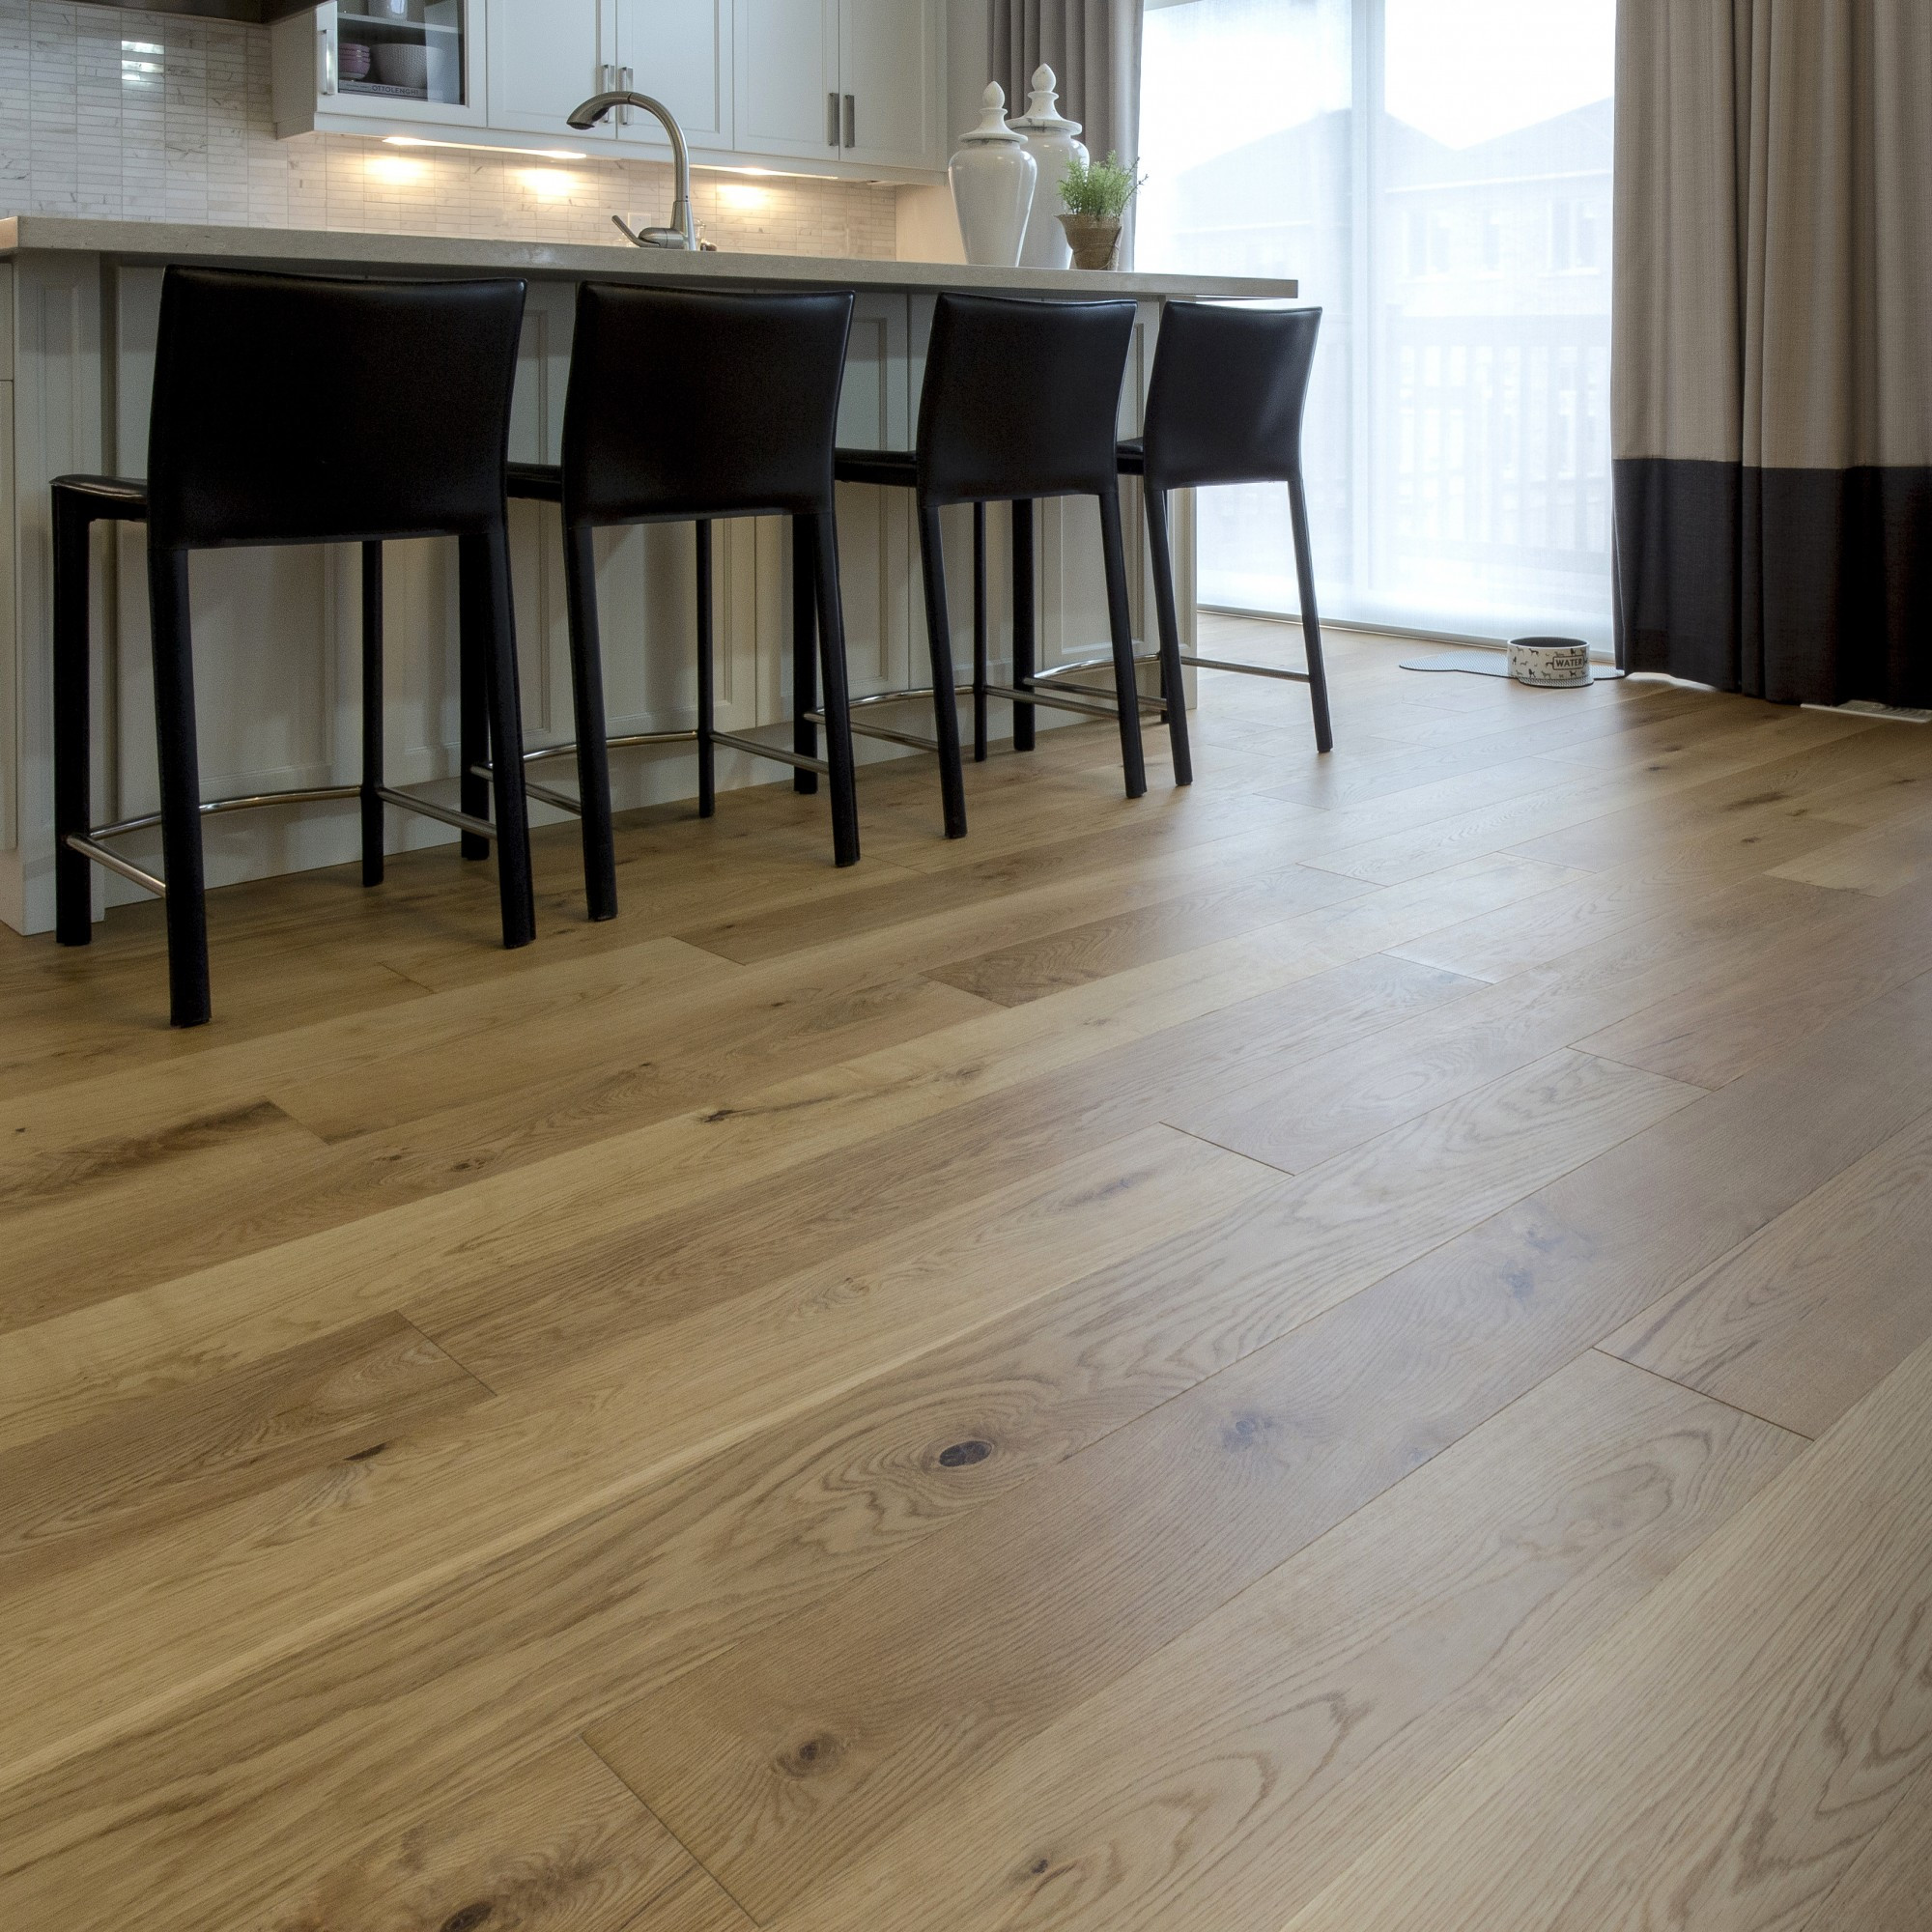 22 attractive Hardwood Flooring Ottawa Prices 2024 free download hardwood flooring ottawa prices of breathtaking hardwood flooring pictures beautiful floors are here only in breathtaking hardwood flooring picture smooth white oak natural vintage and engin